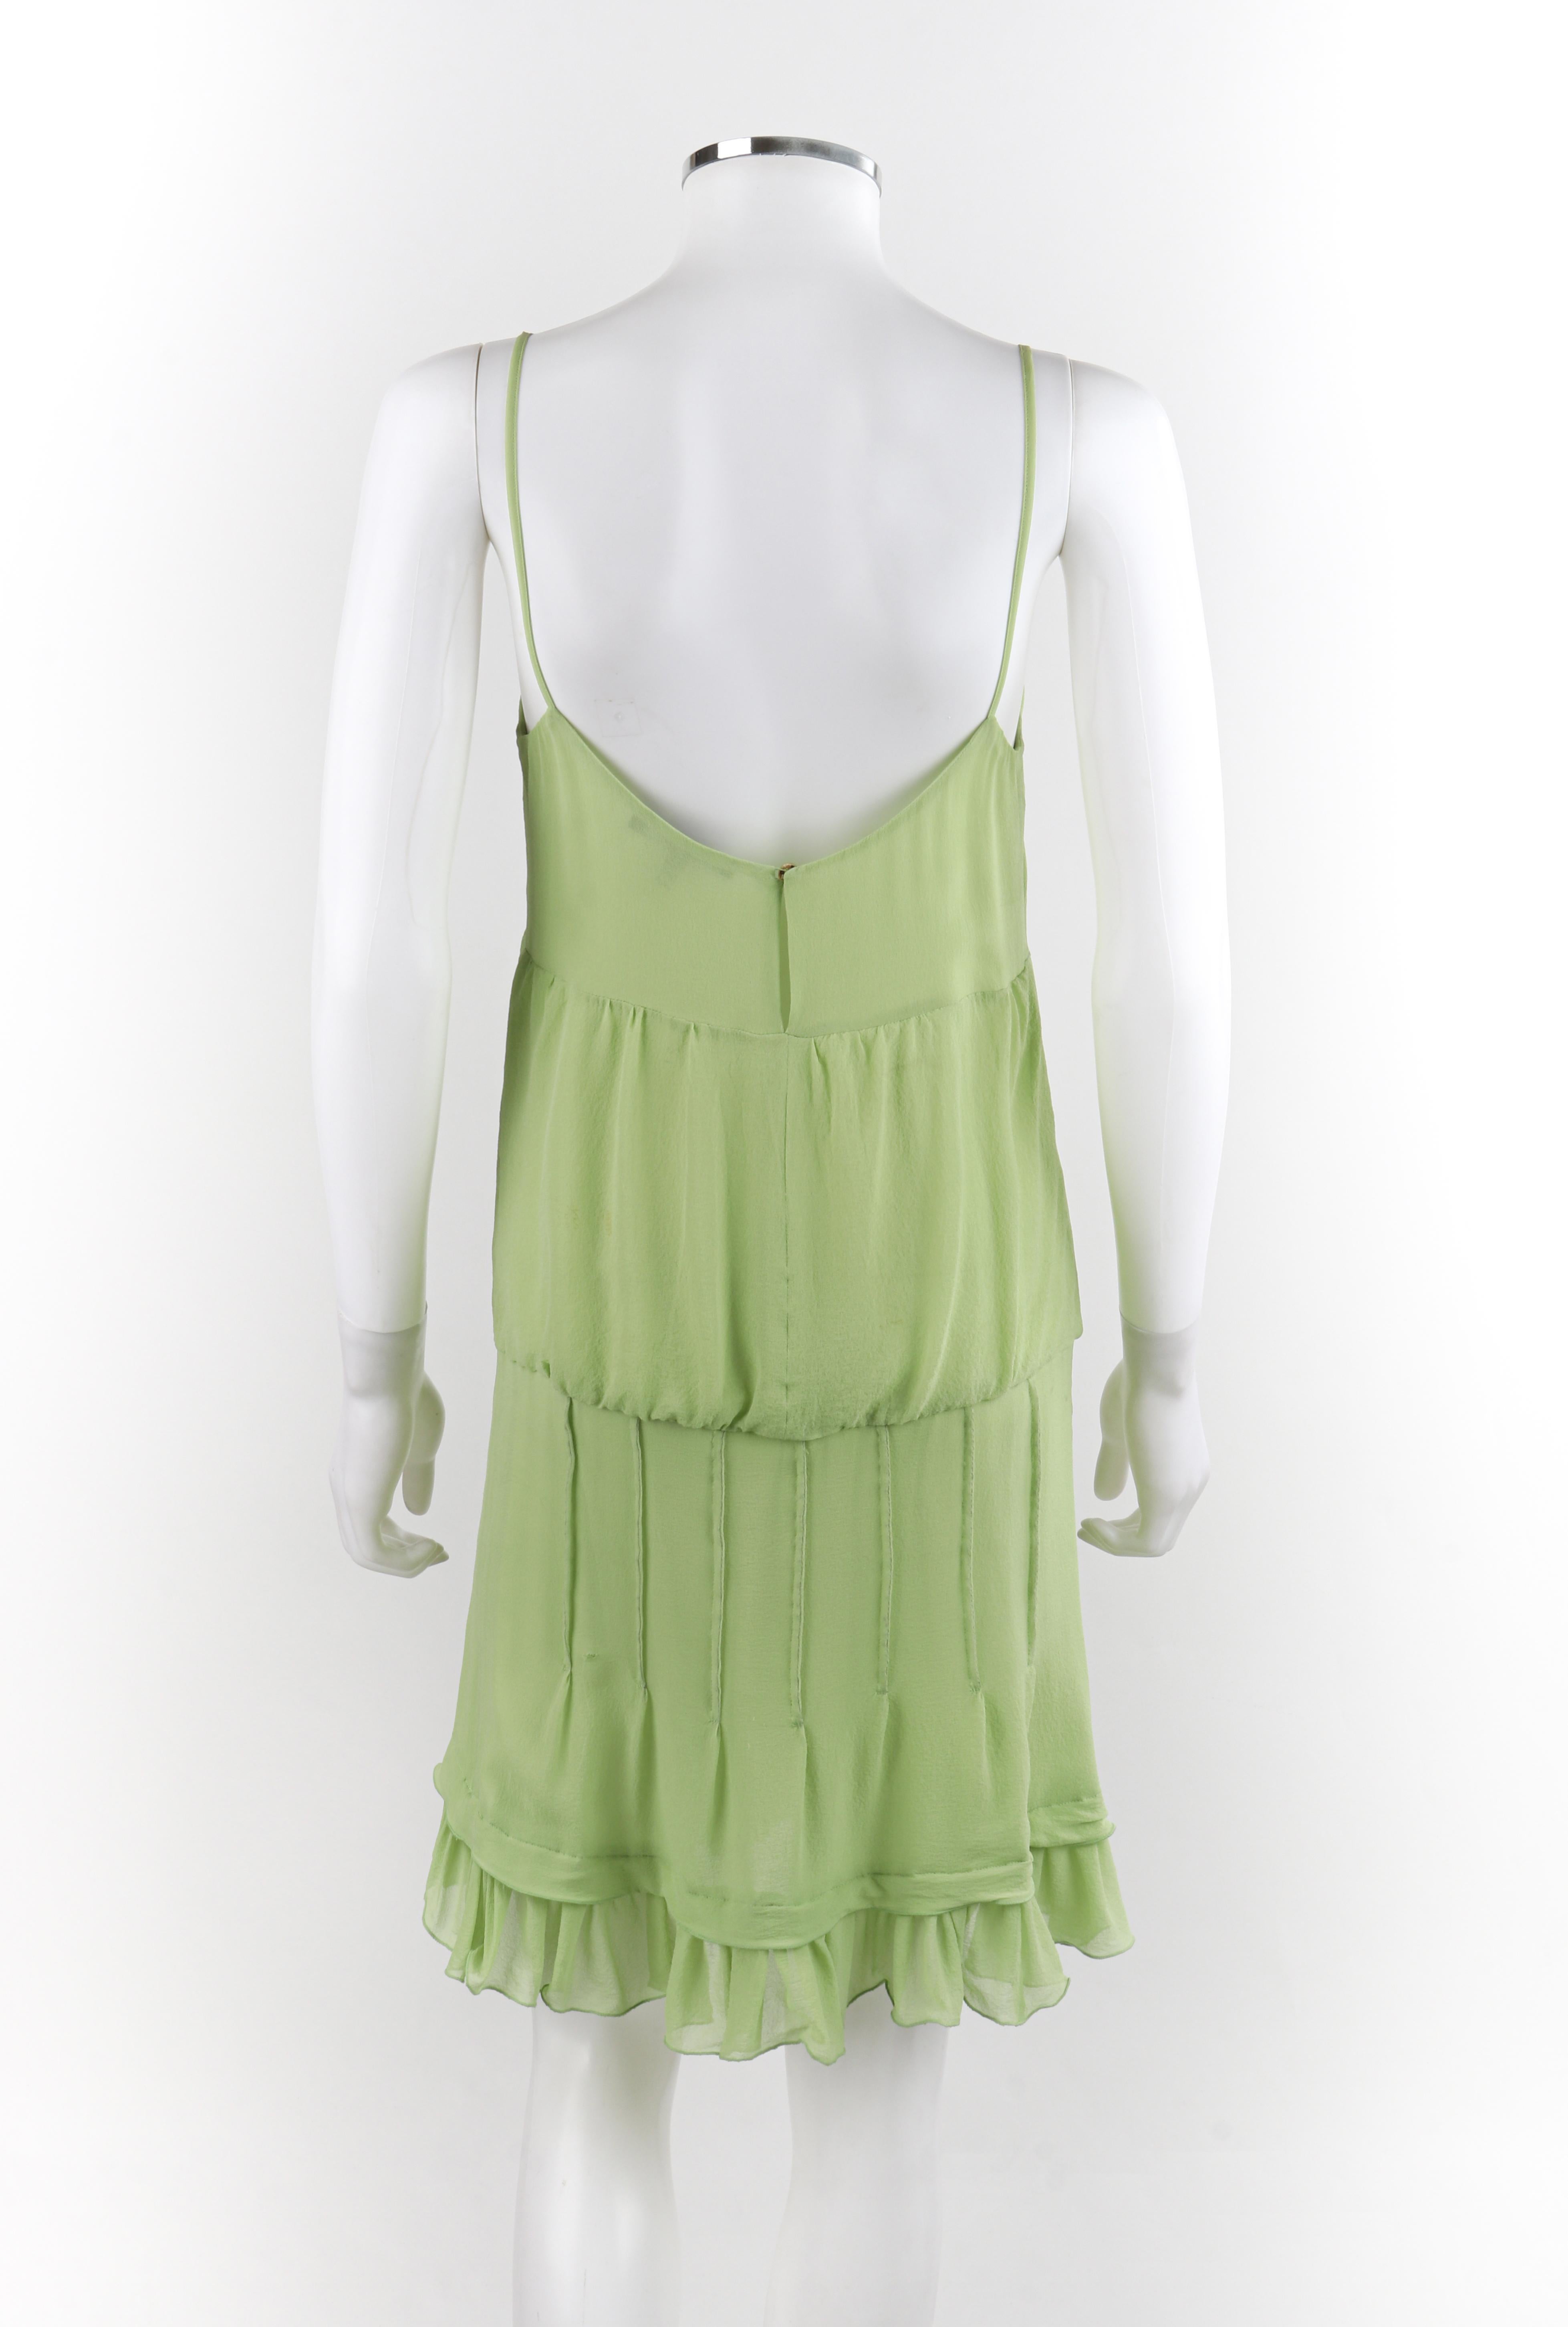 ALEXANDER MCQUEEN S/S 1996 Chartreuse Ruffled Tiered V-neck Pleated Sundress  For Sale 2